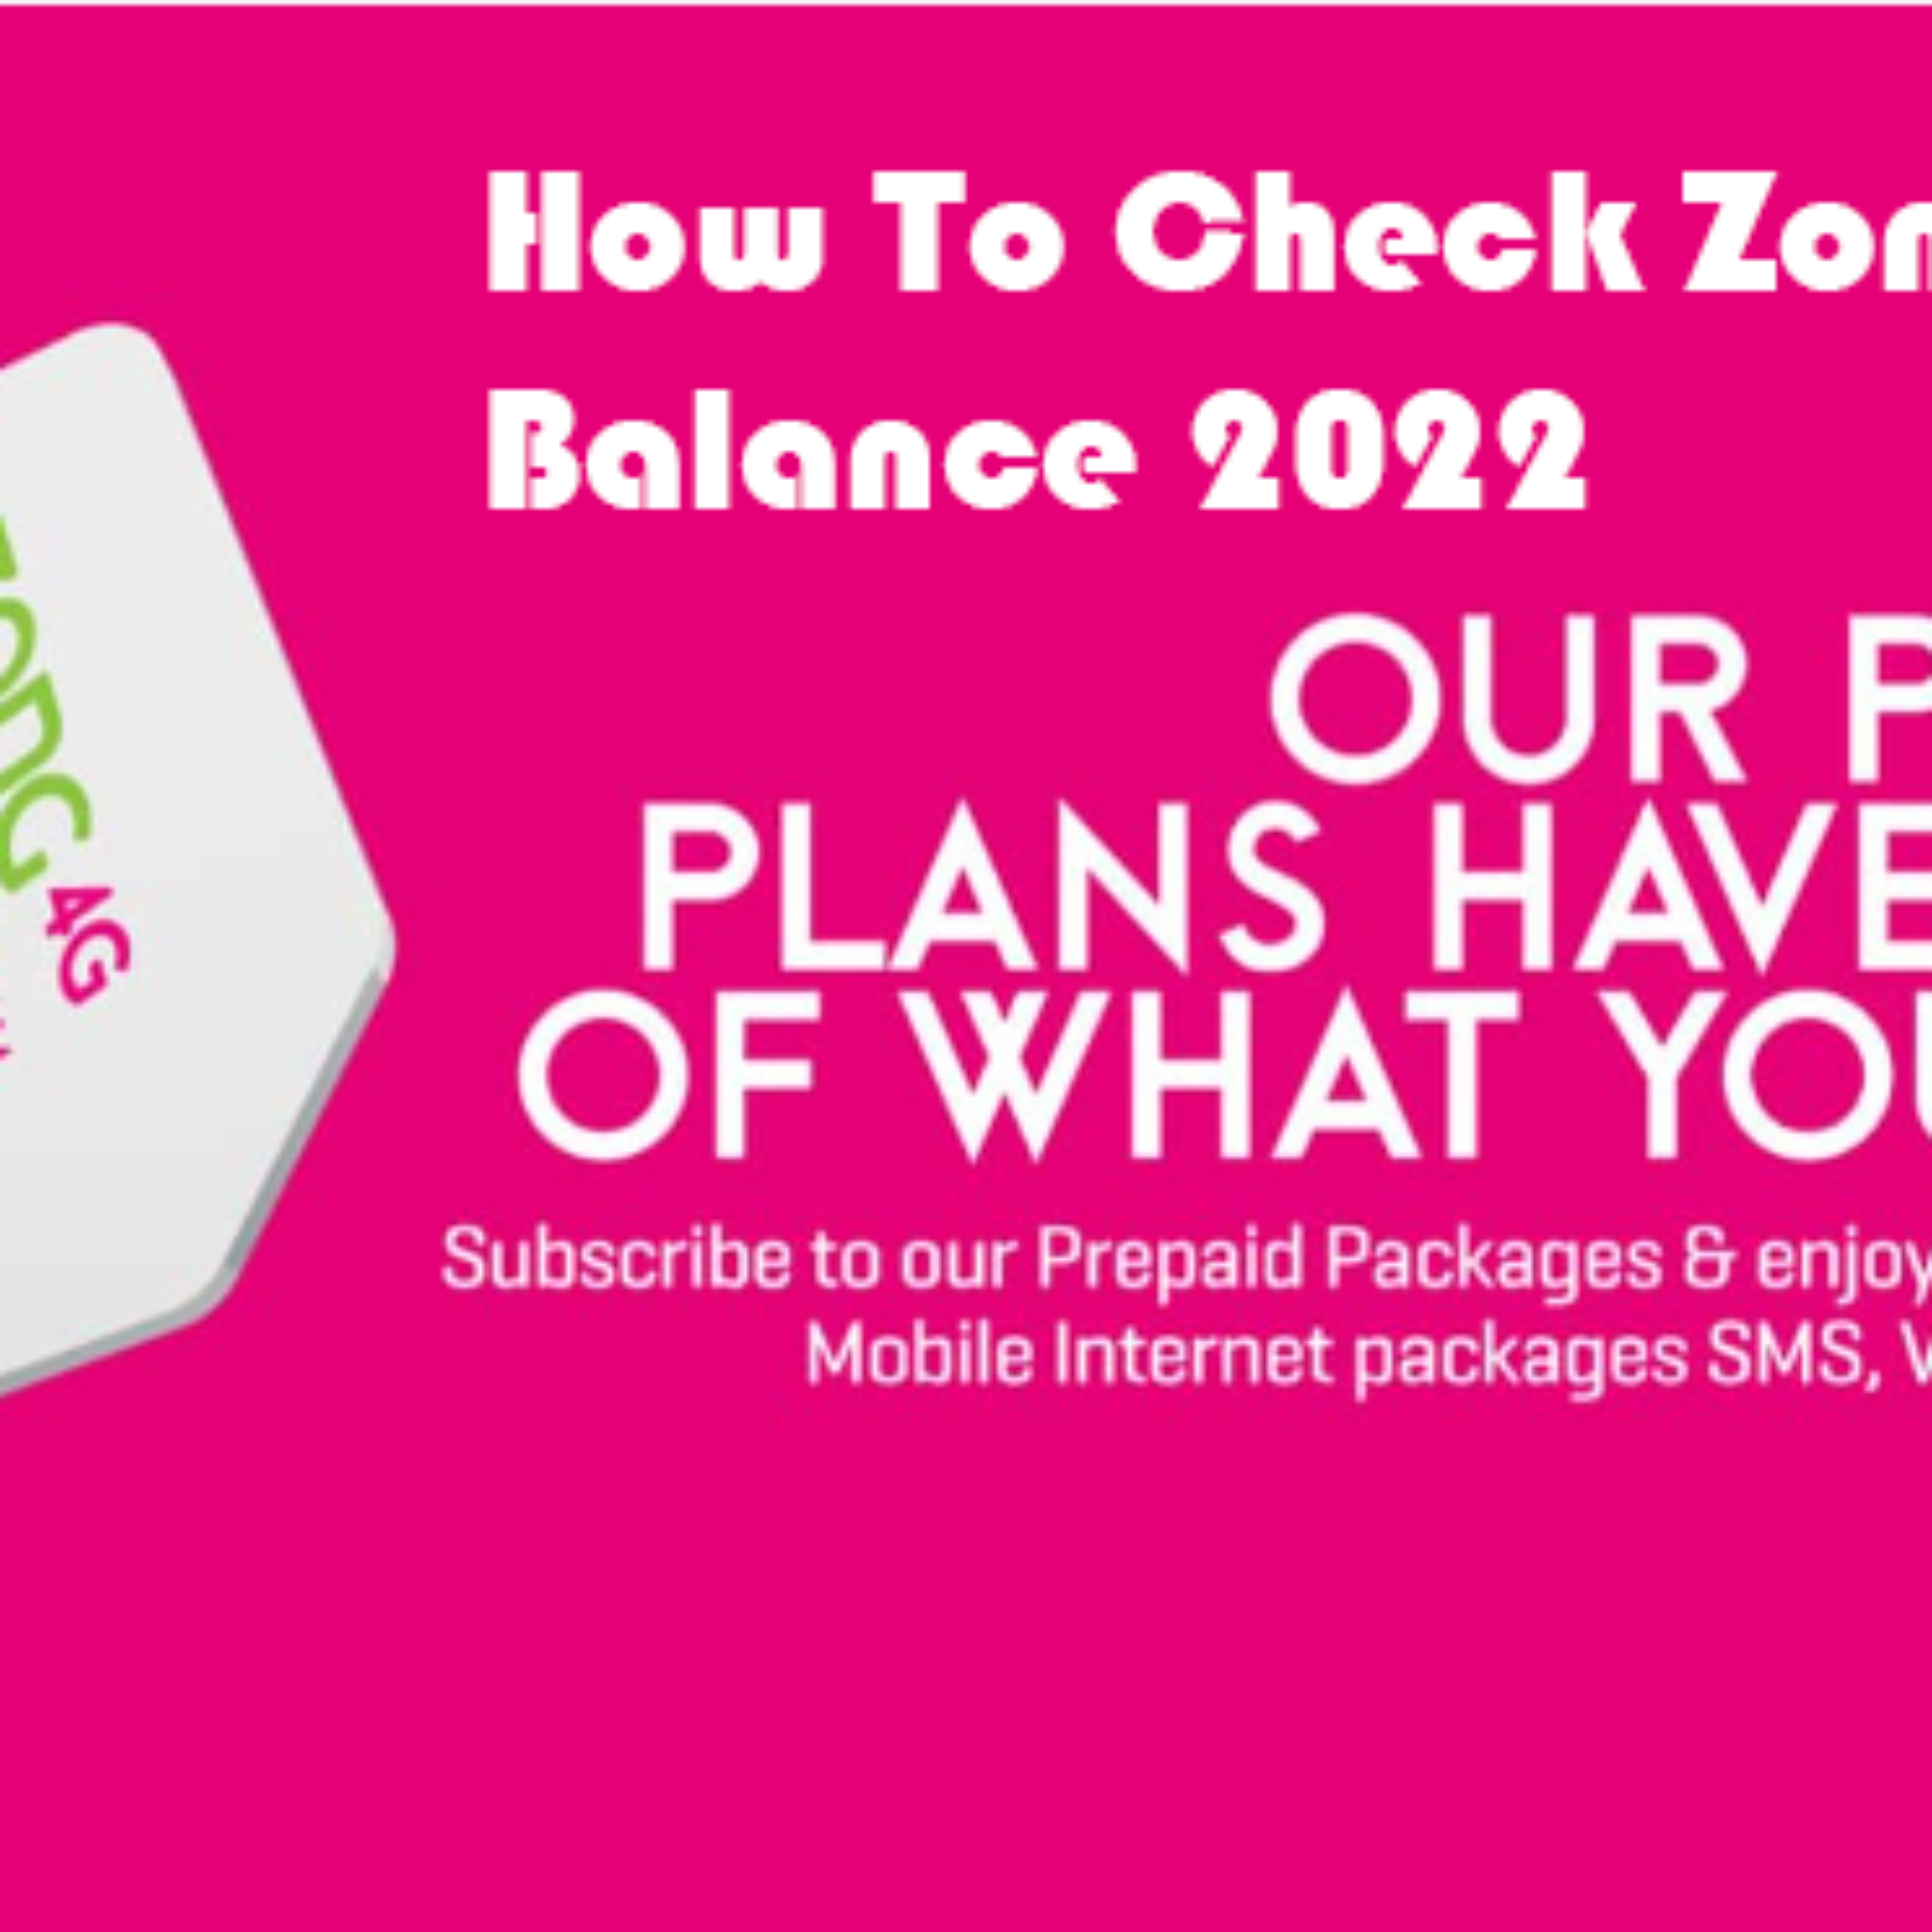 How To Check Zong Balance 2022